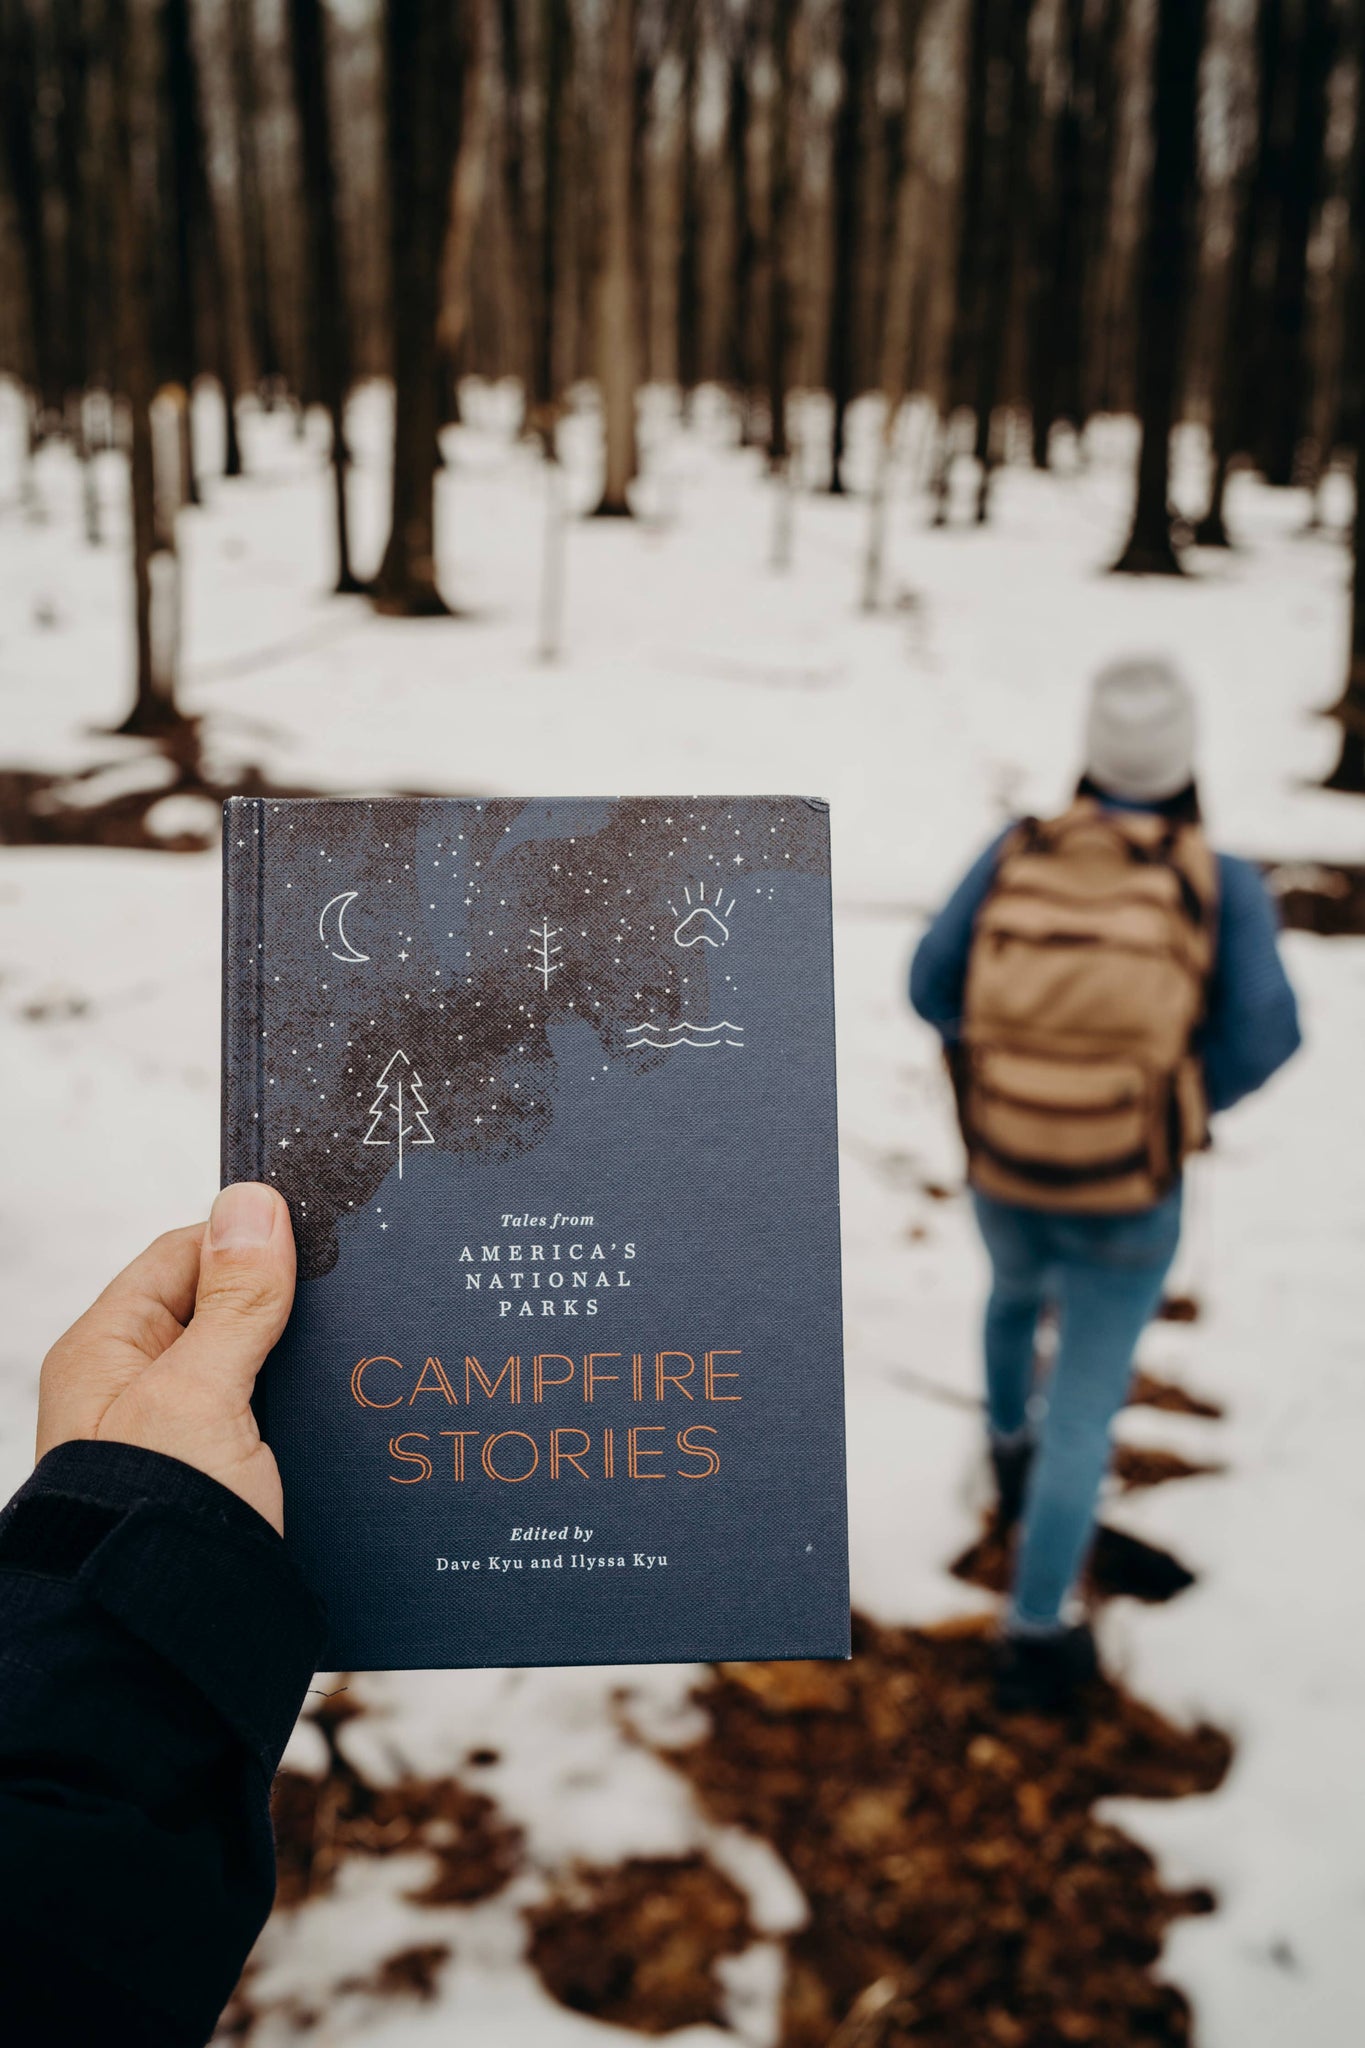 Mountaineers Books - Campfire StoriesTales from America's National Parks